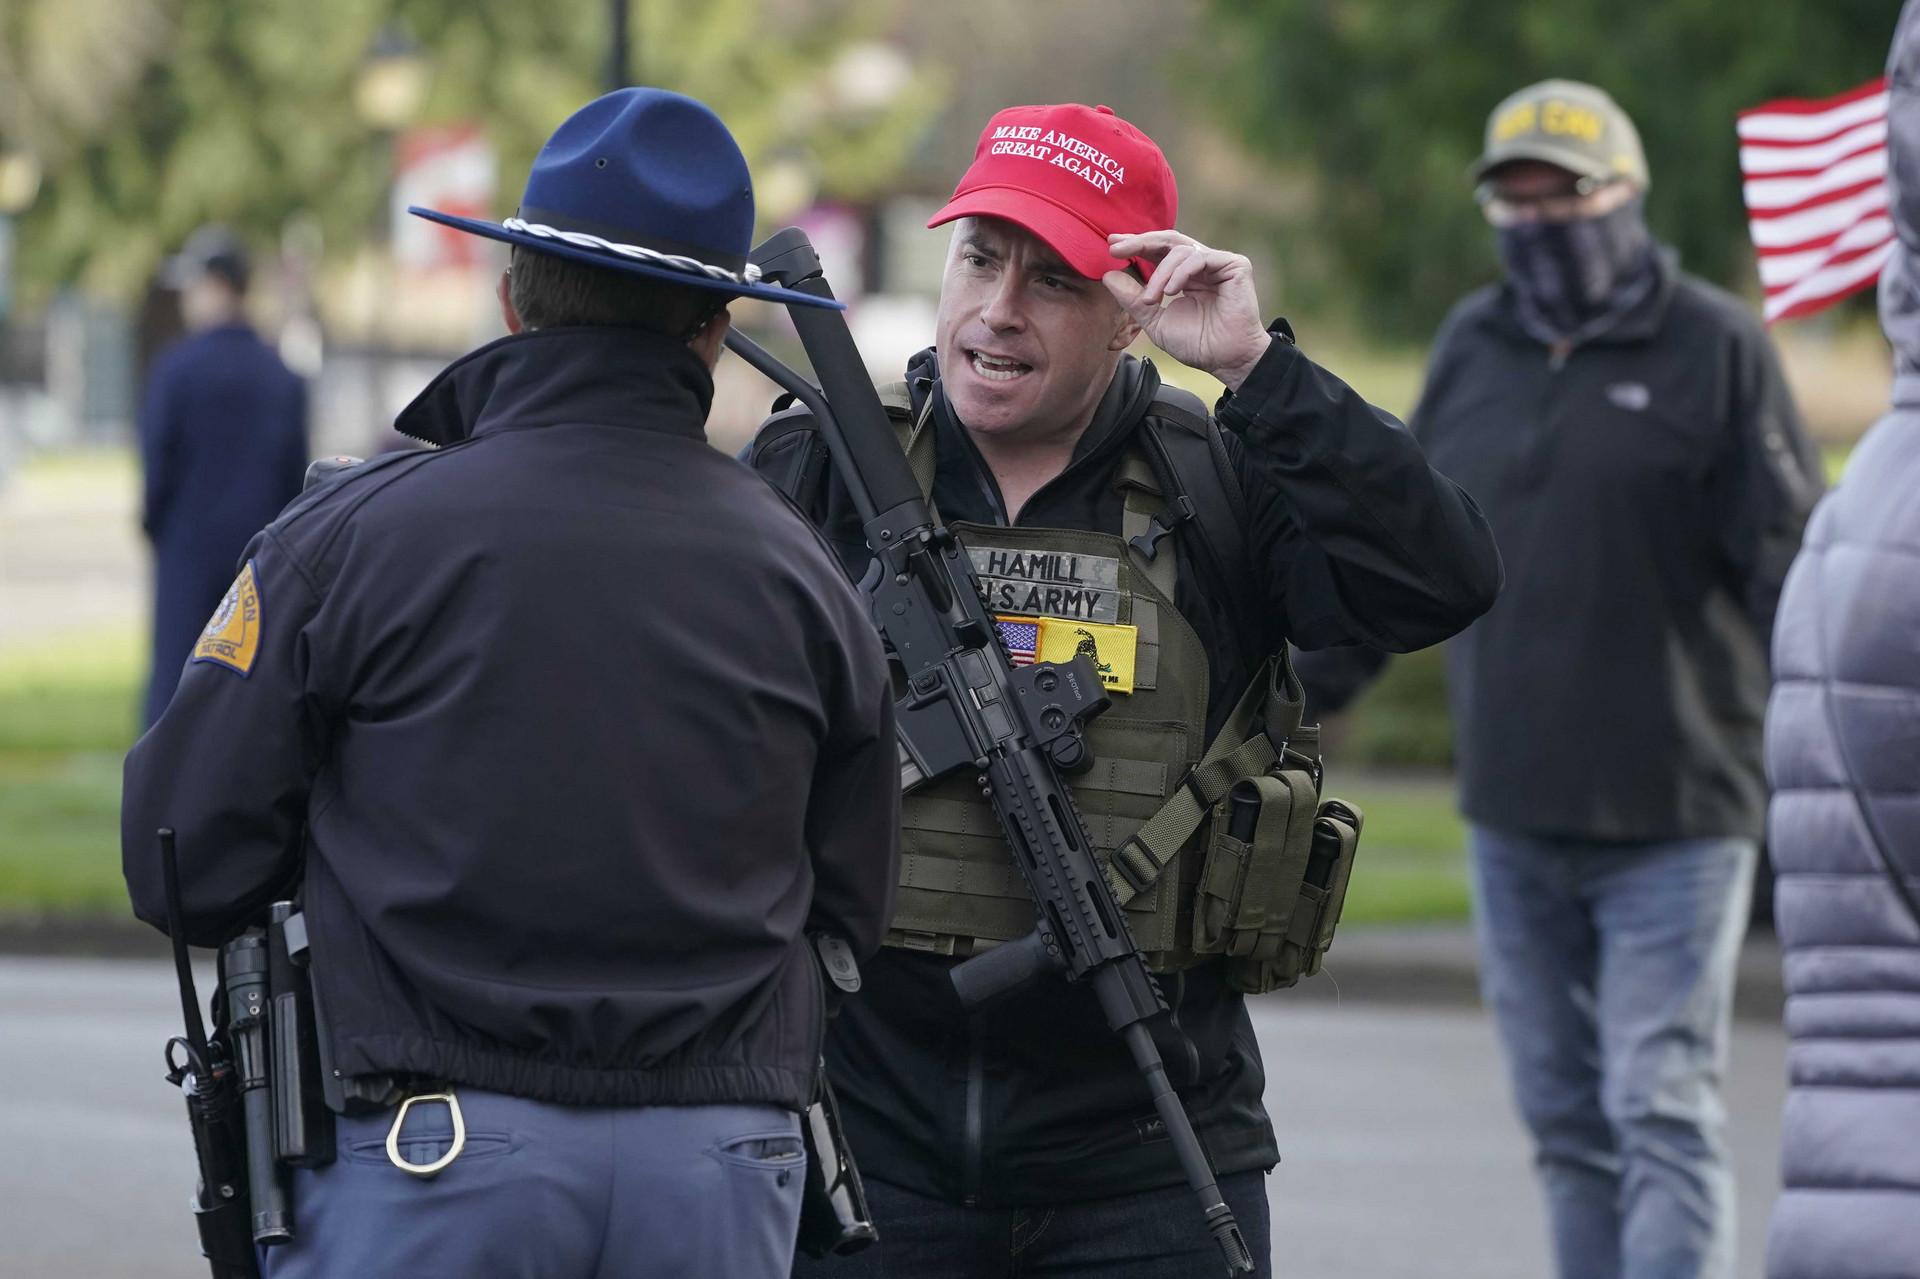 A protester confronts a law enforcement officer